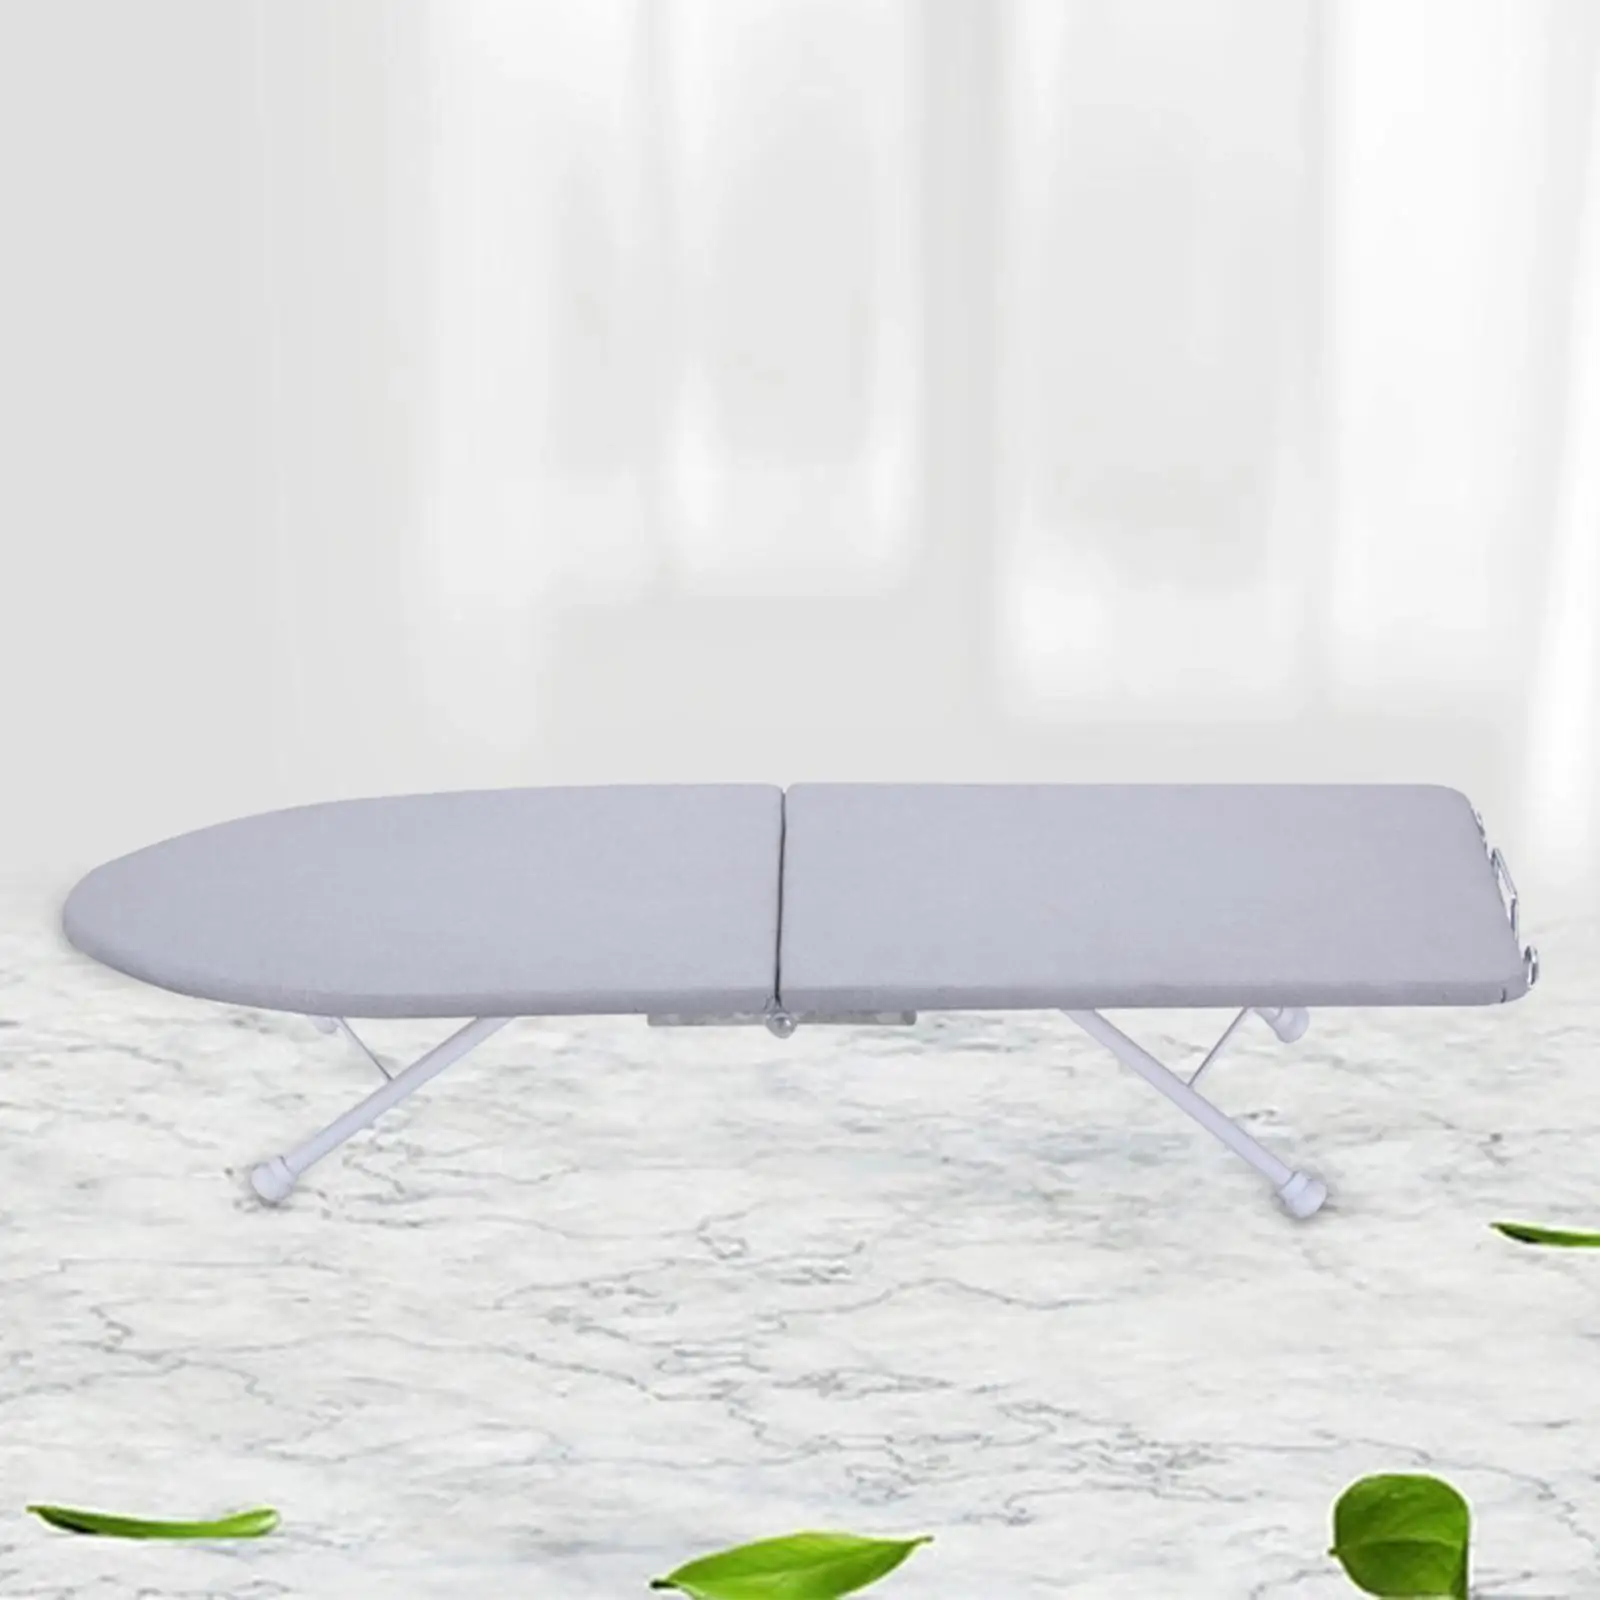 Tabletop Ironing Board Heavy Duty Space Saving Mini Ironing Board with Iron Rest for Apartment, Dorm, Home, Craft Room, Travel